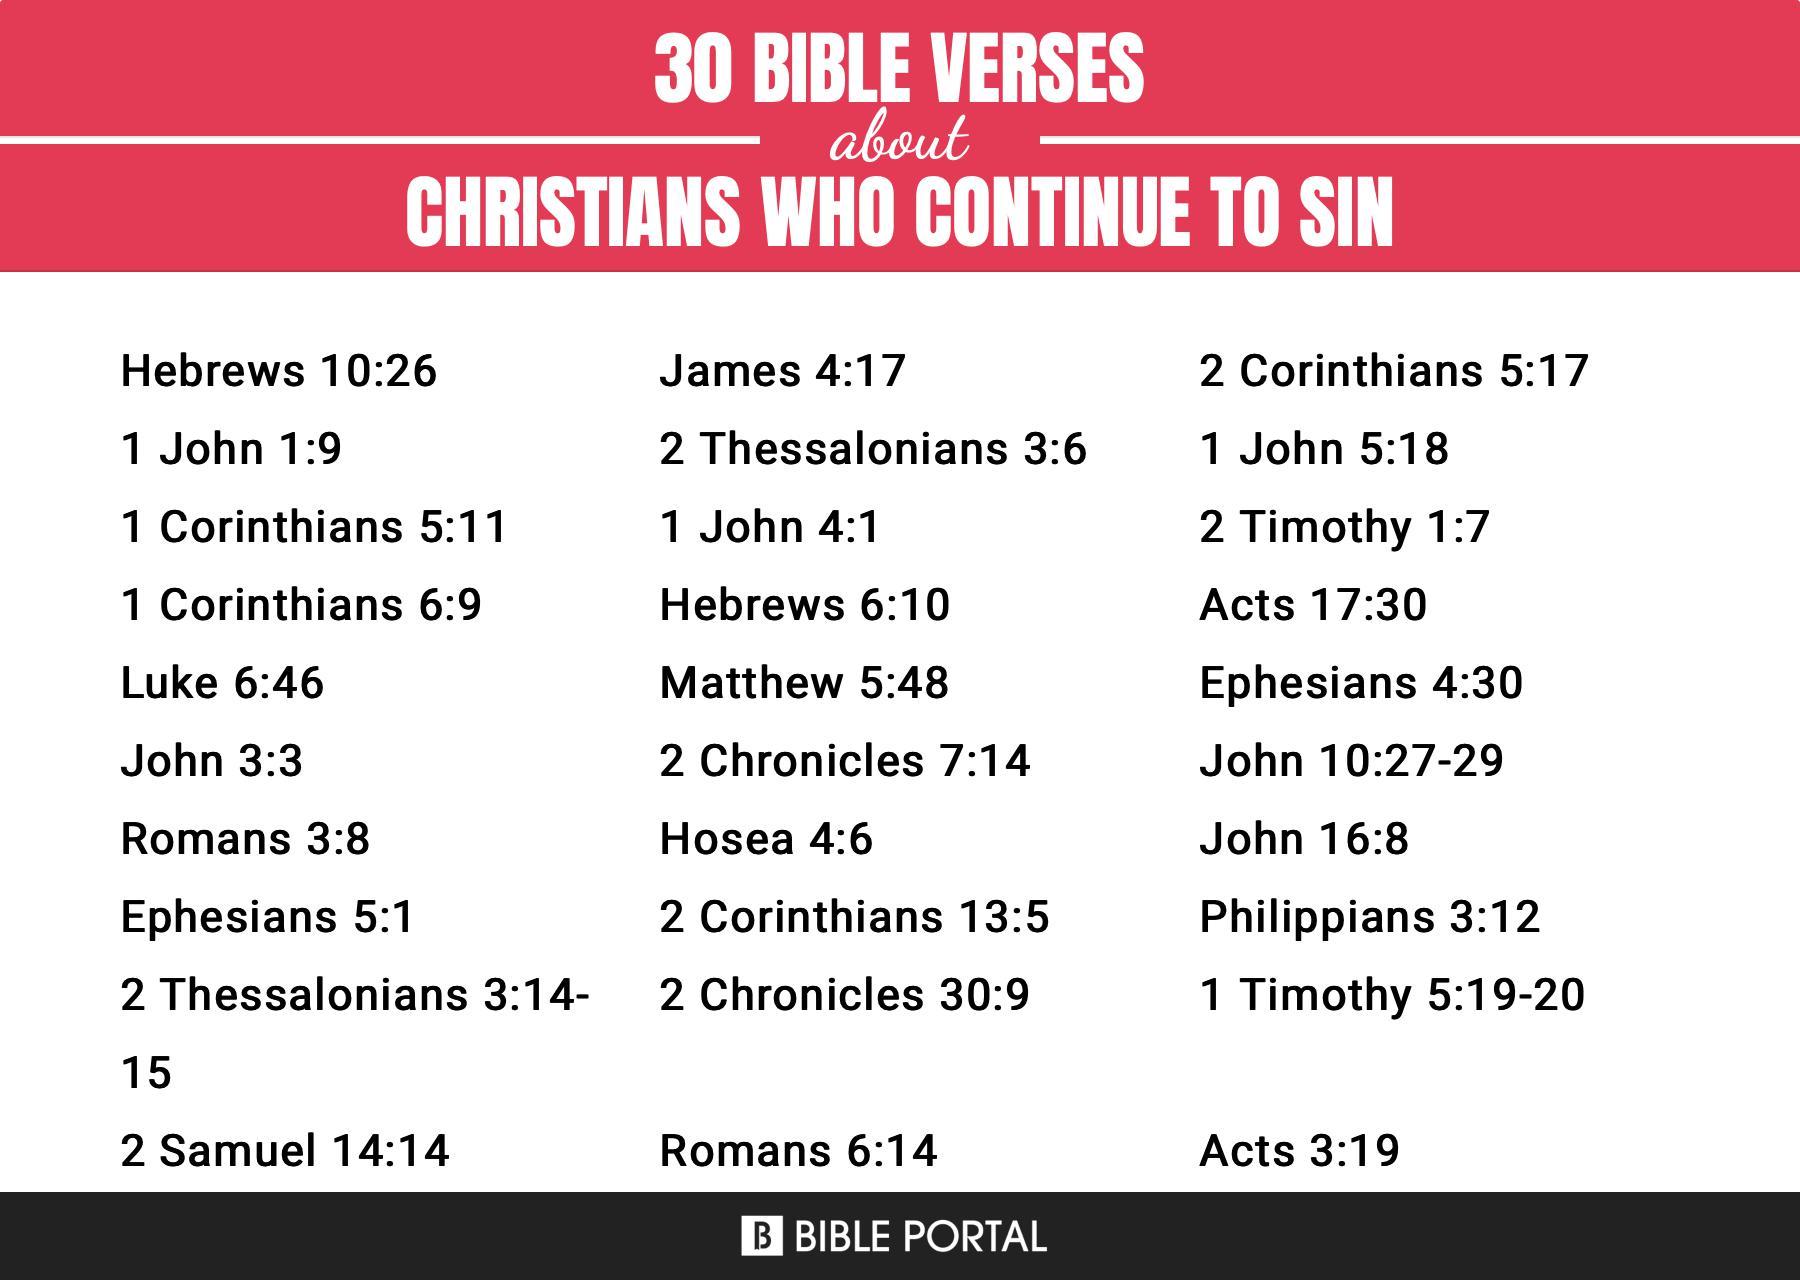 What Does the Bible Say about Christians Who Continue To Sin?